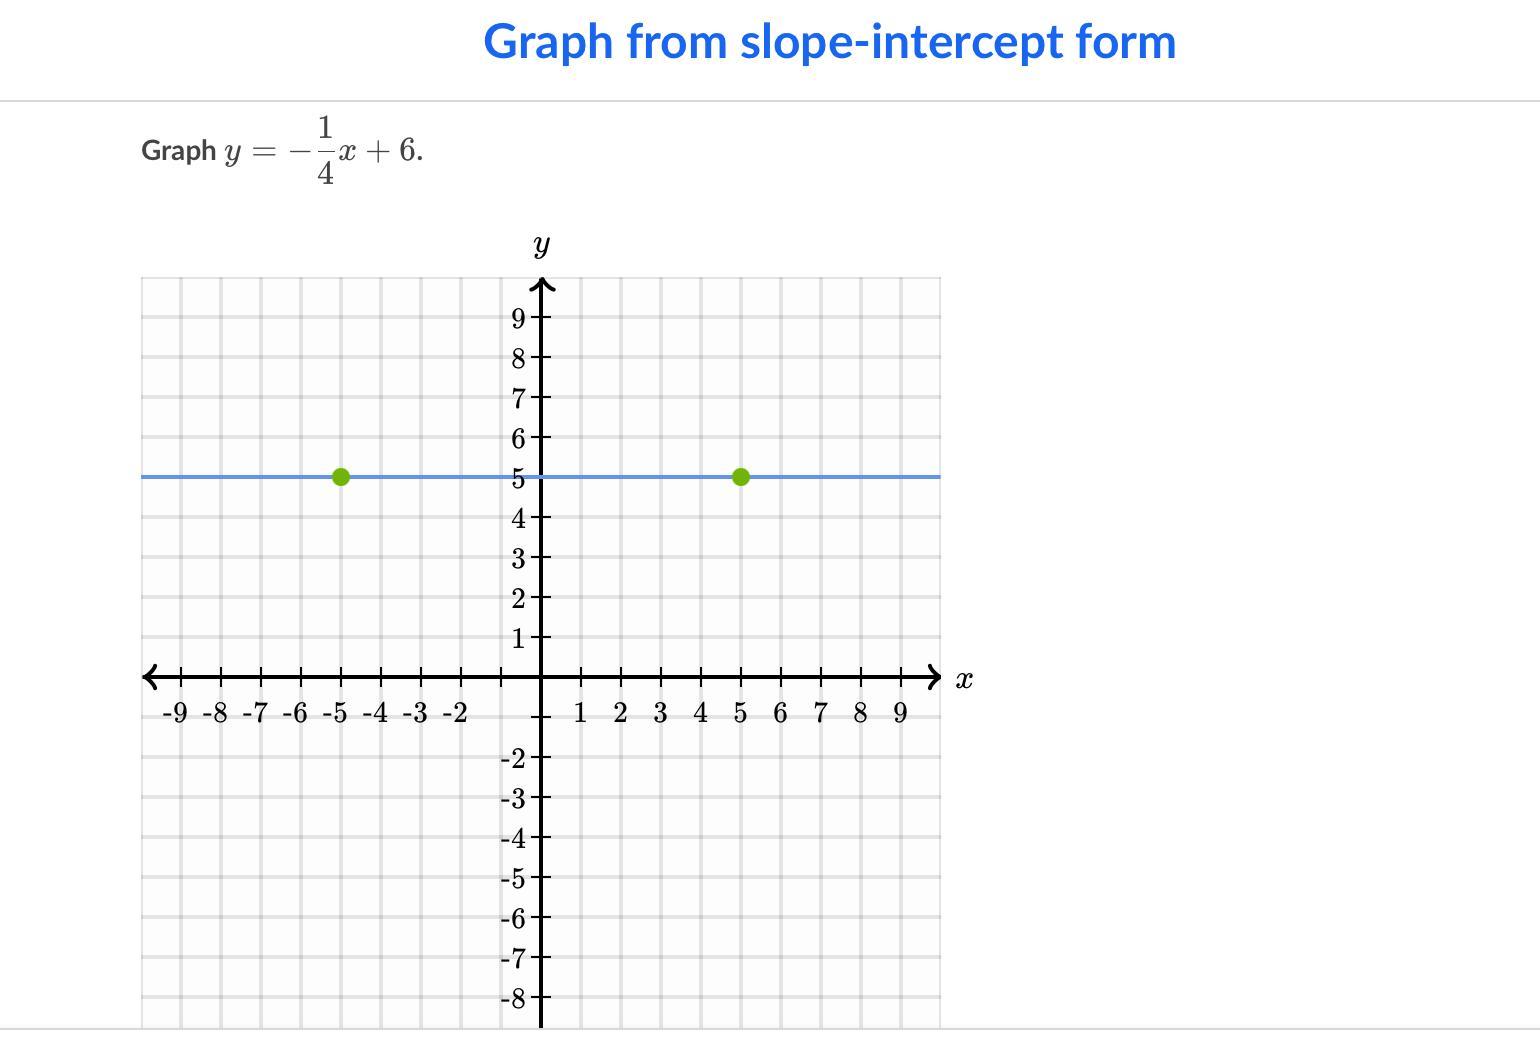 Please Help Asap! The Numbers For The Graph Have To Be Whole! (Cant Be .5)